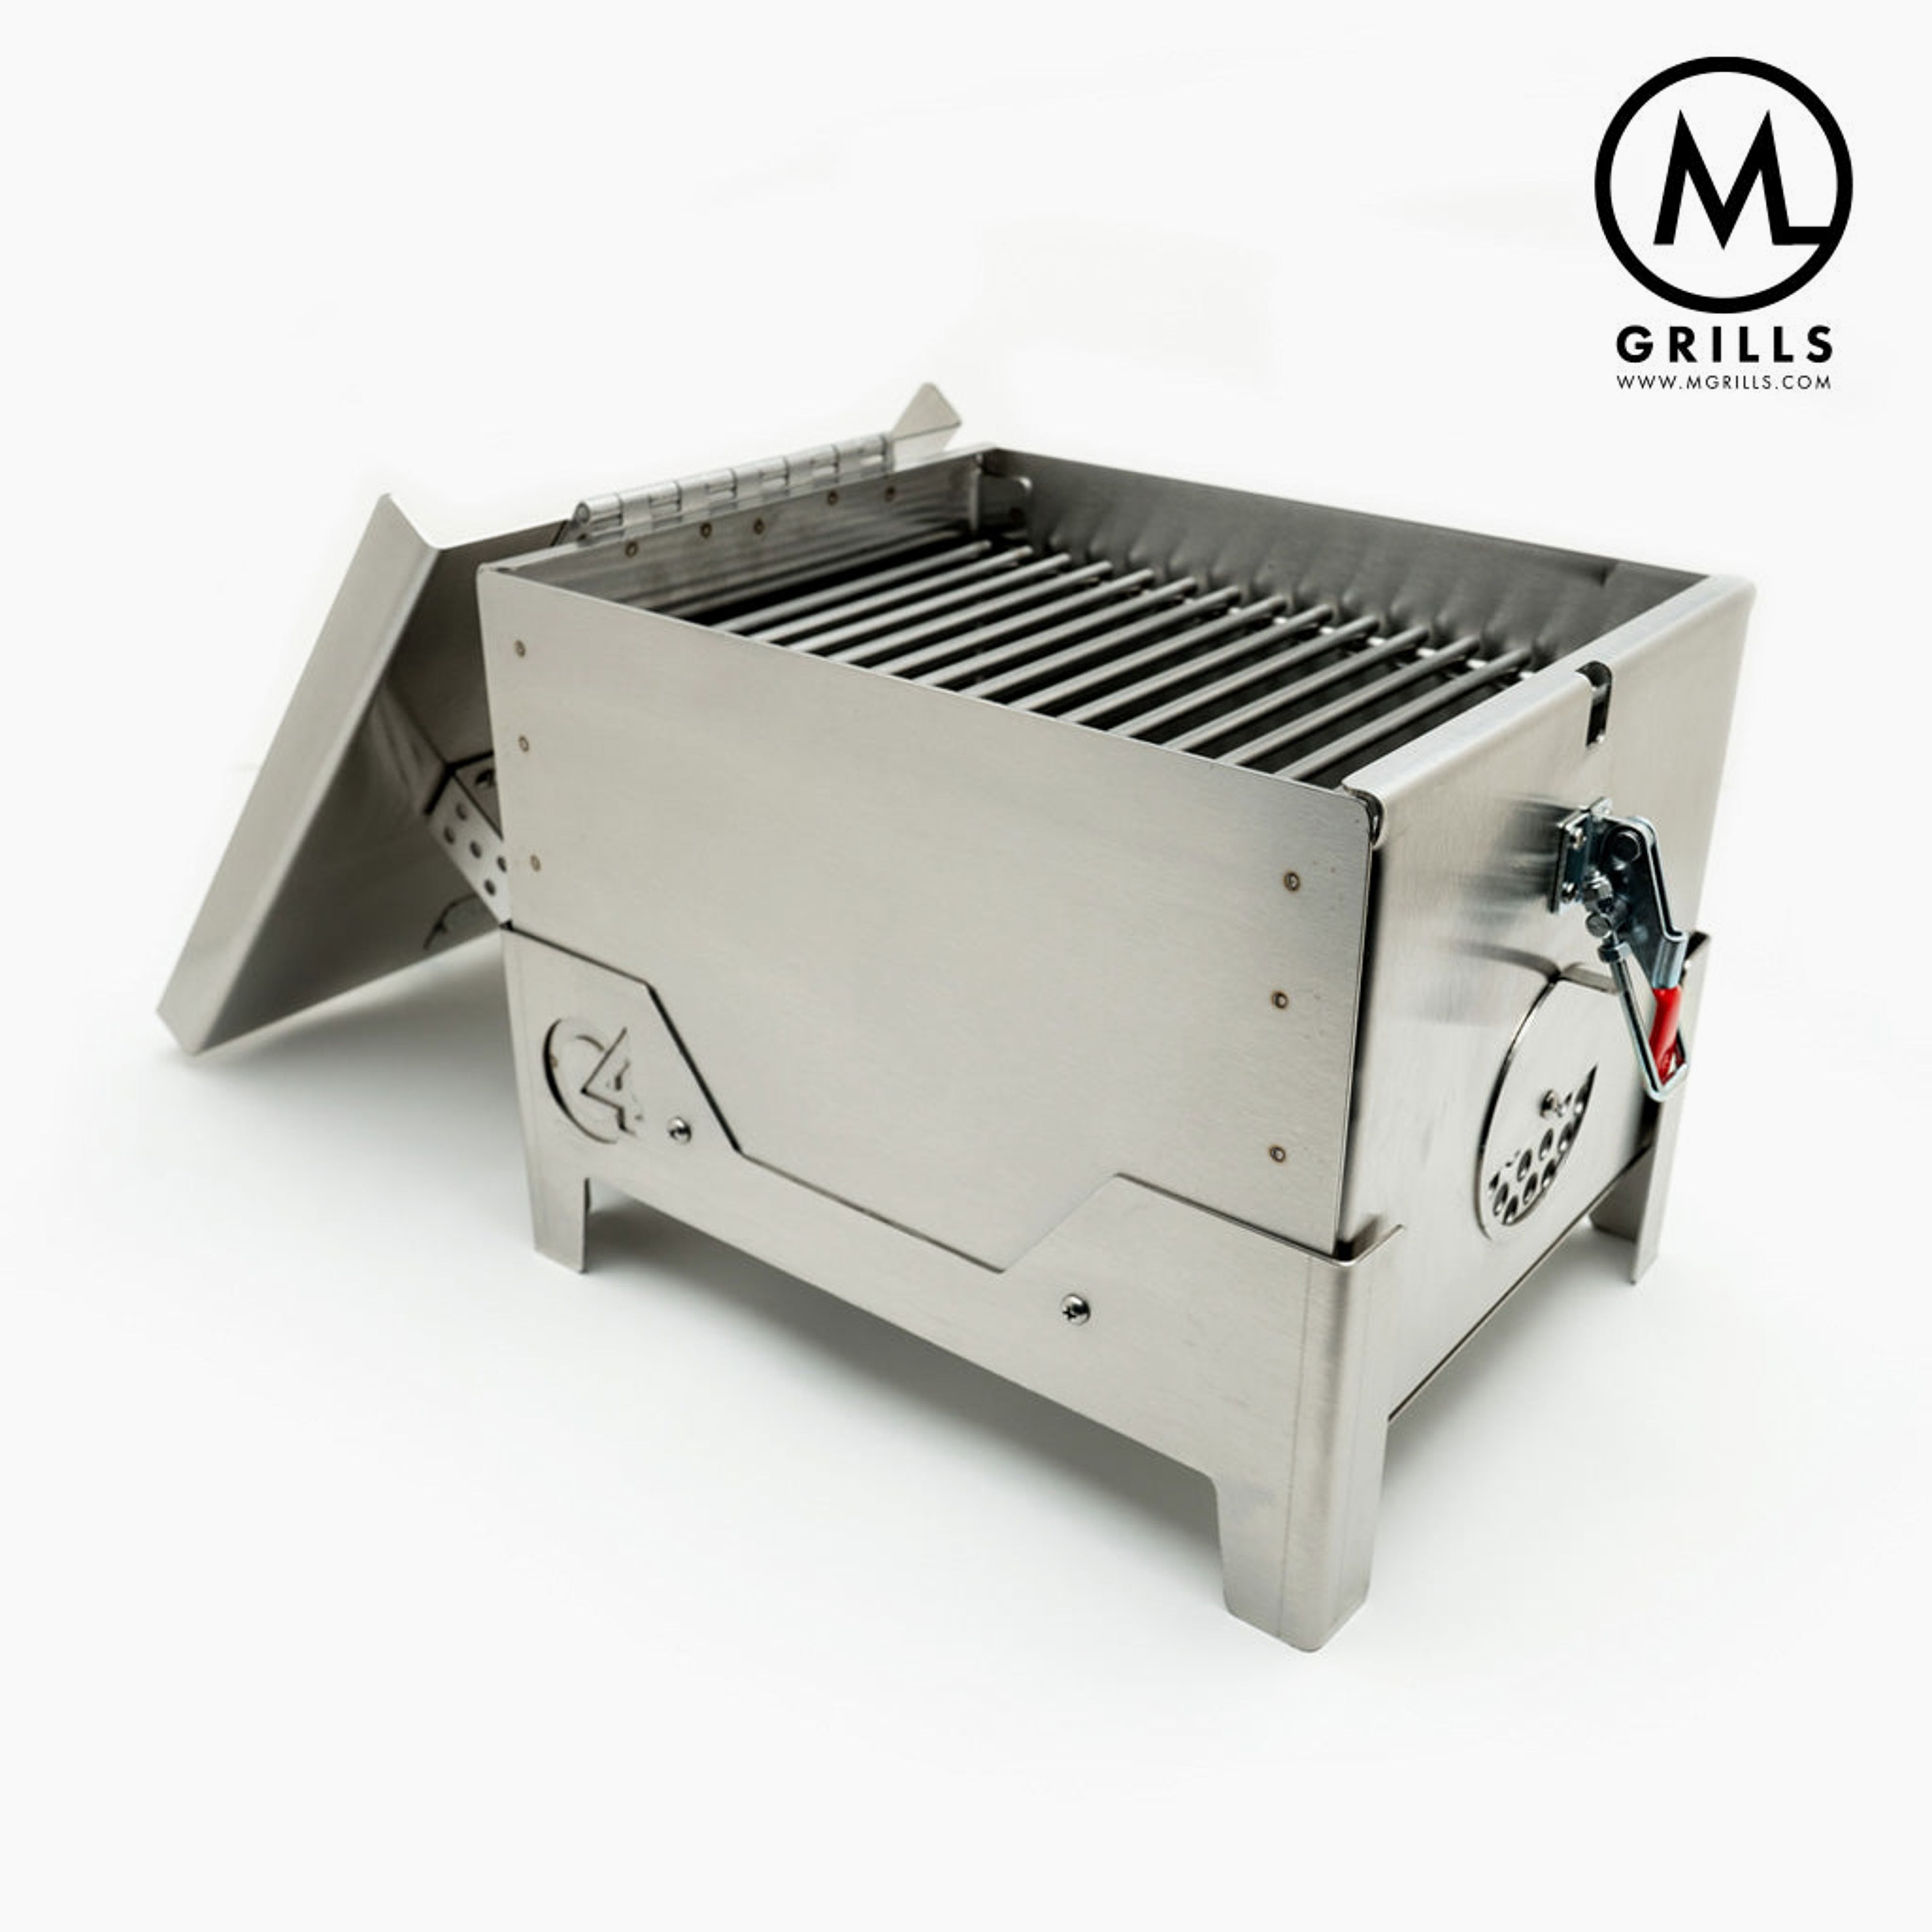 C4 Portable, Insulated Charcoal Grill